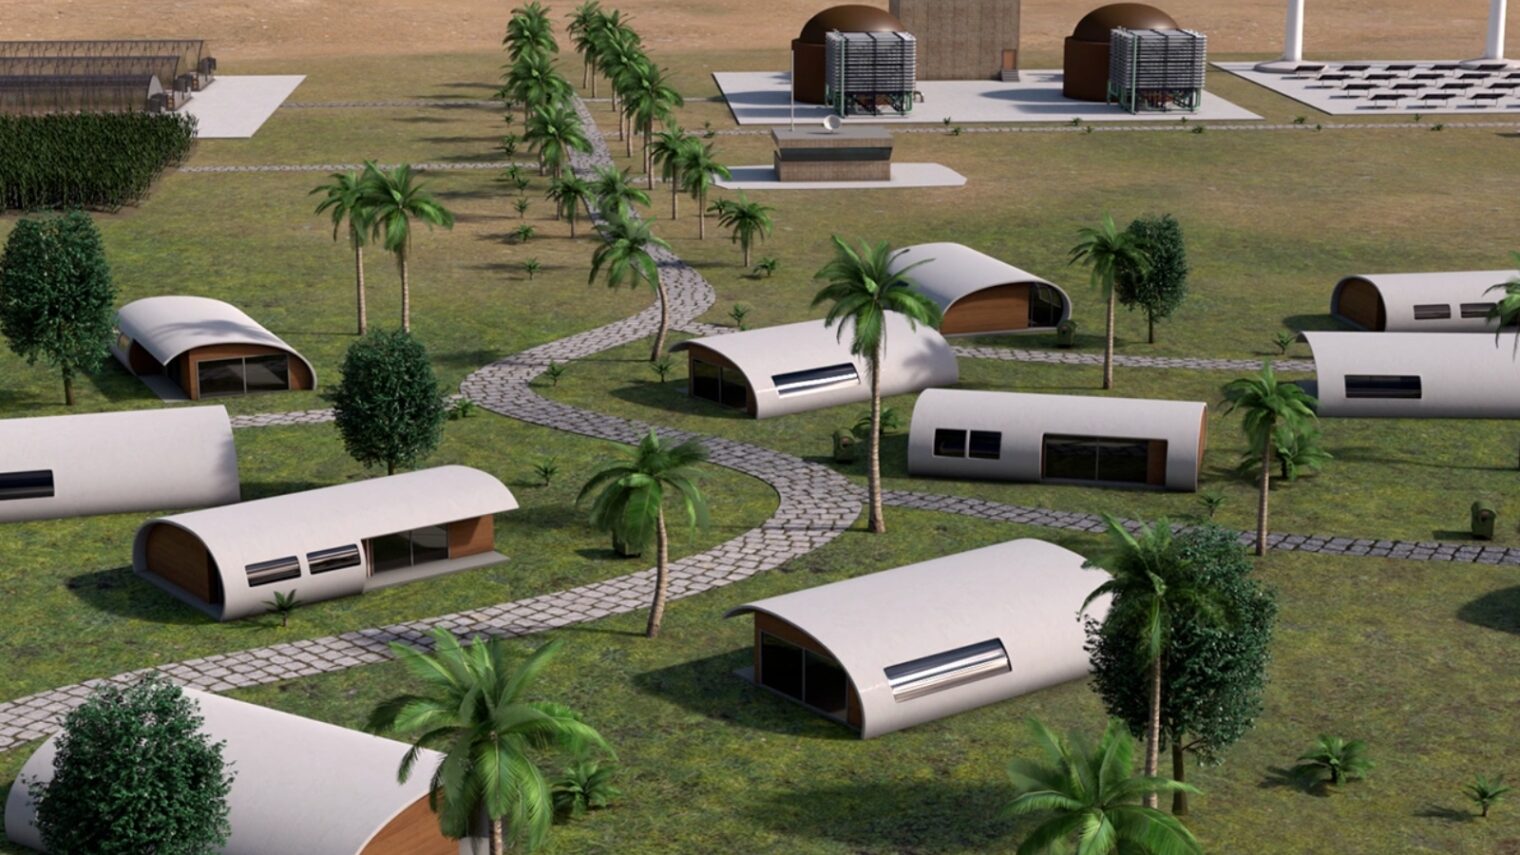 Village in a Box houses are monolithic domes that are fast, affordable and earthquake-proof. Photo: courtesy